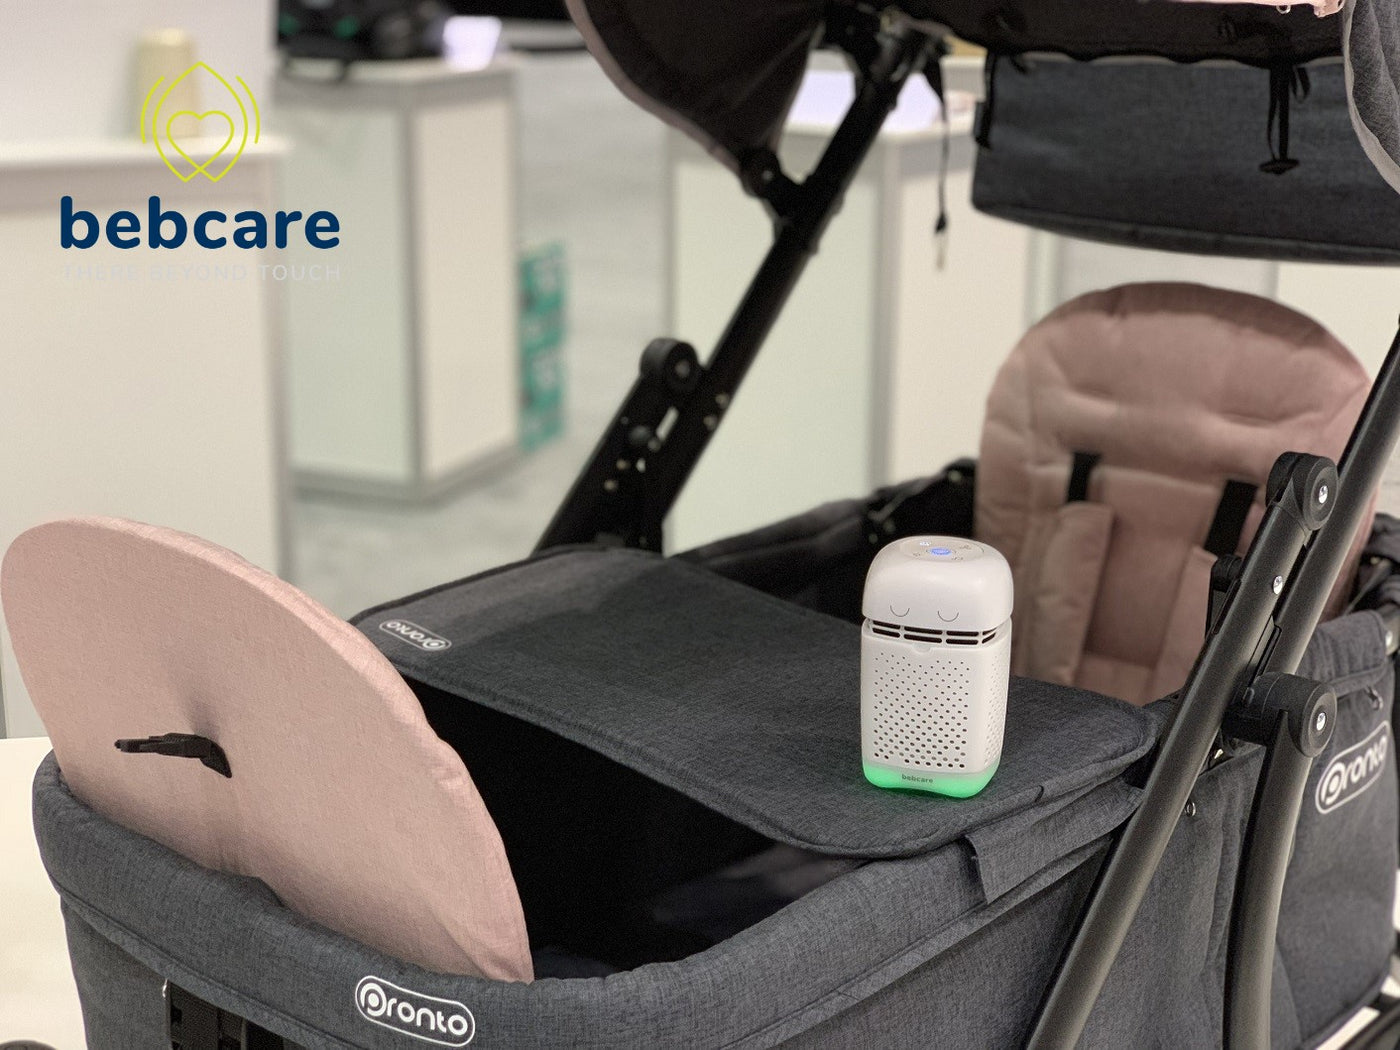 The Bebcare Air can be mounted in the stroller to protect your baby on-the-go